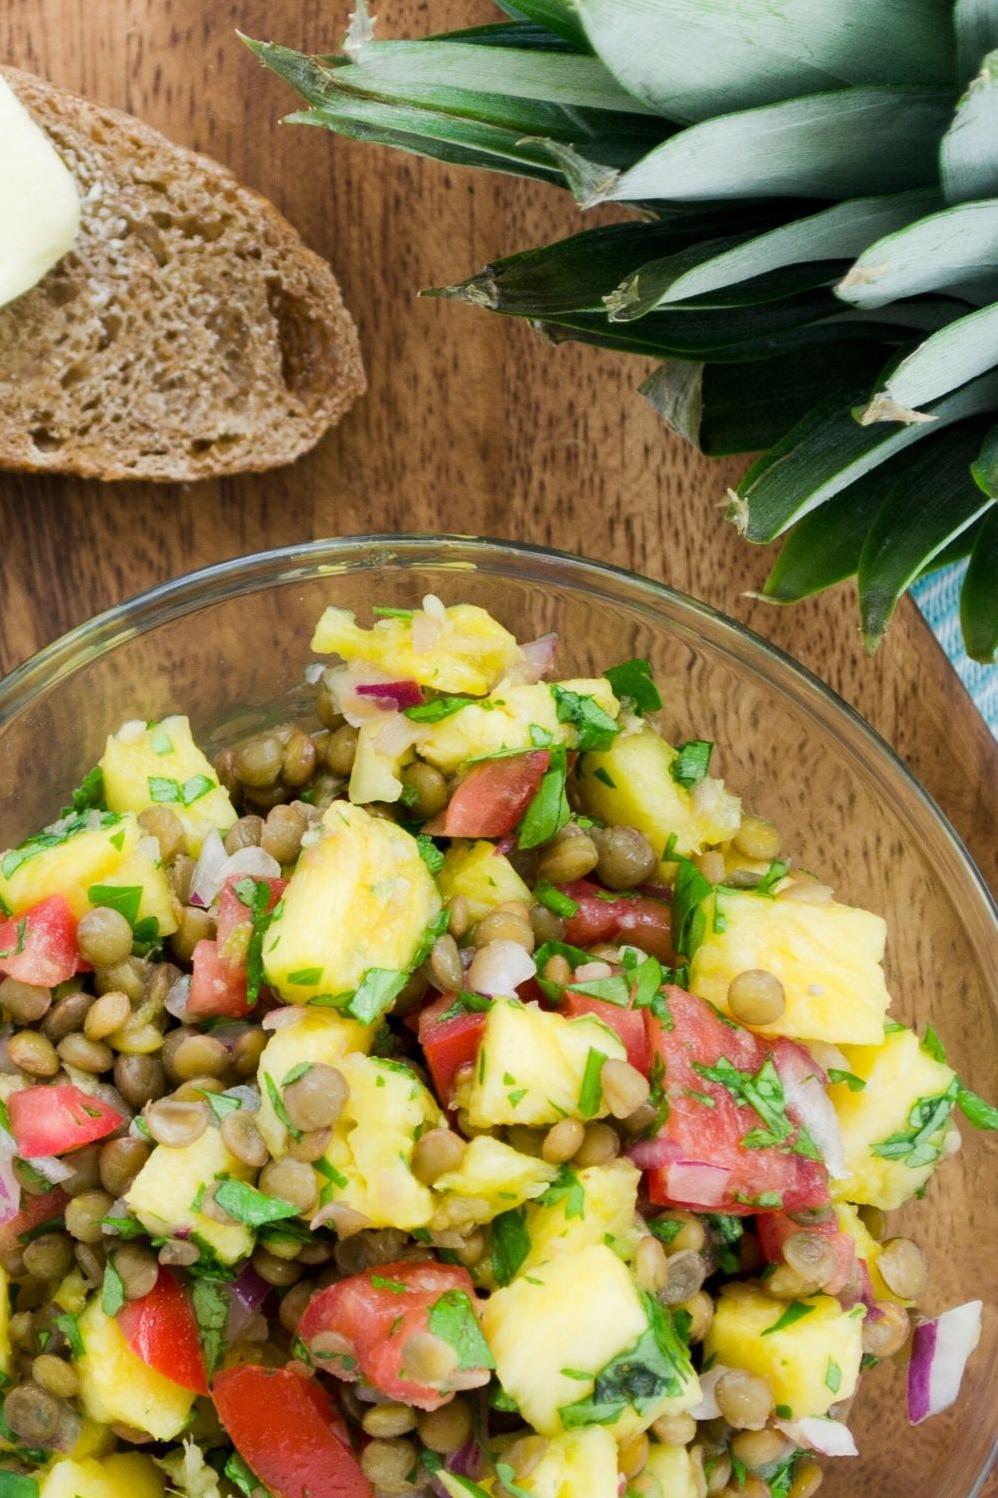  Packed with plant-based protein from lentils and bursting with juicy chunks of mango and pineapple, this salad is a meal in itself.